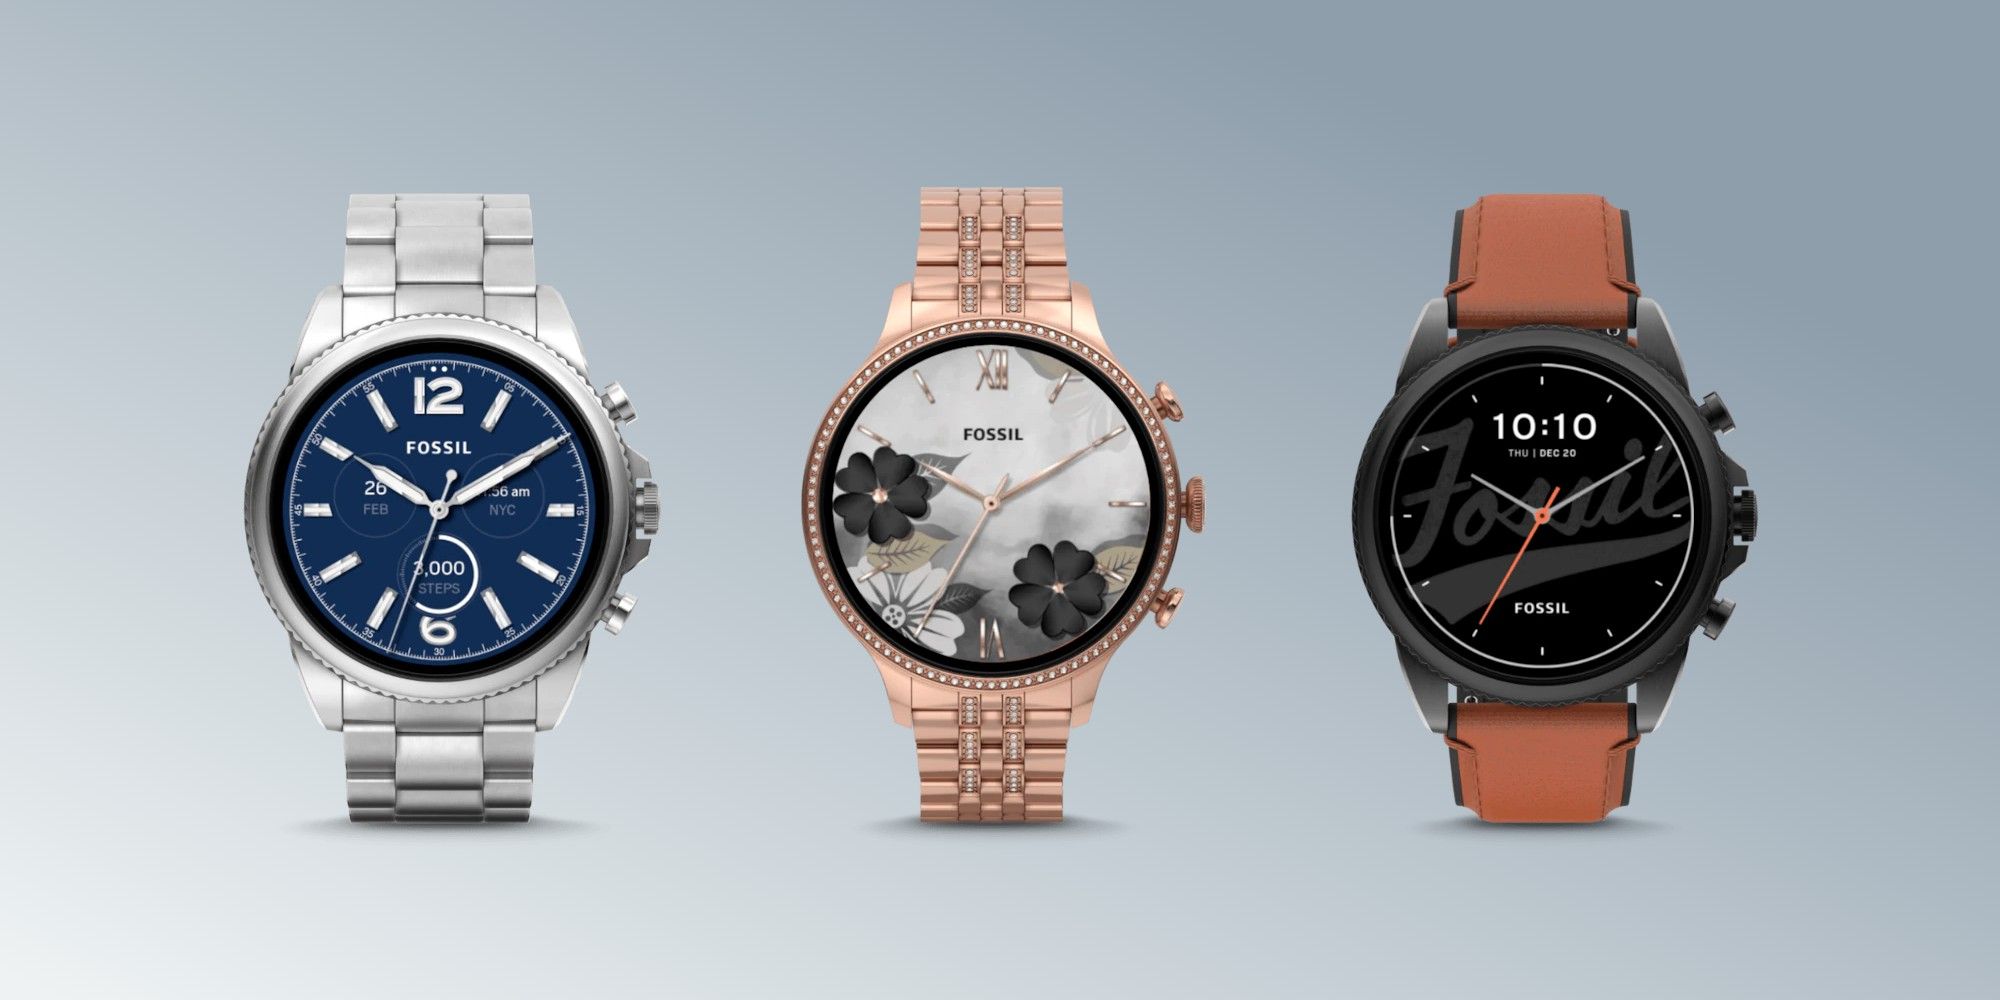  Fossil Has No Plans To Launch A New Wear OS Smartwatch In 2022